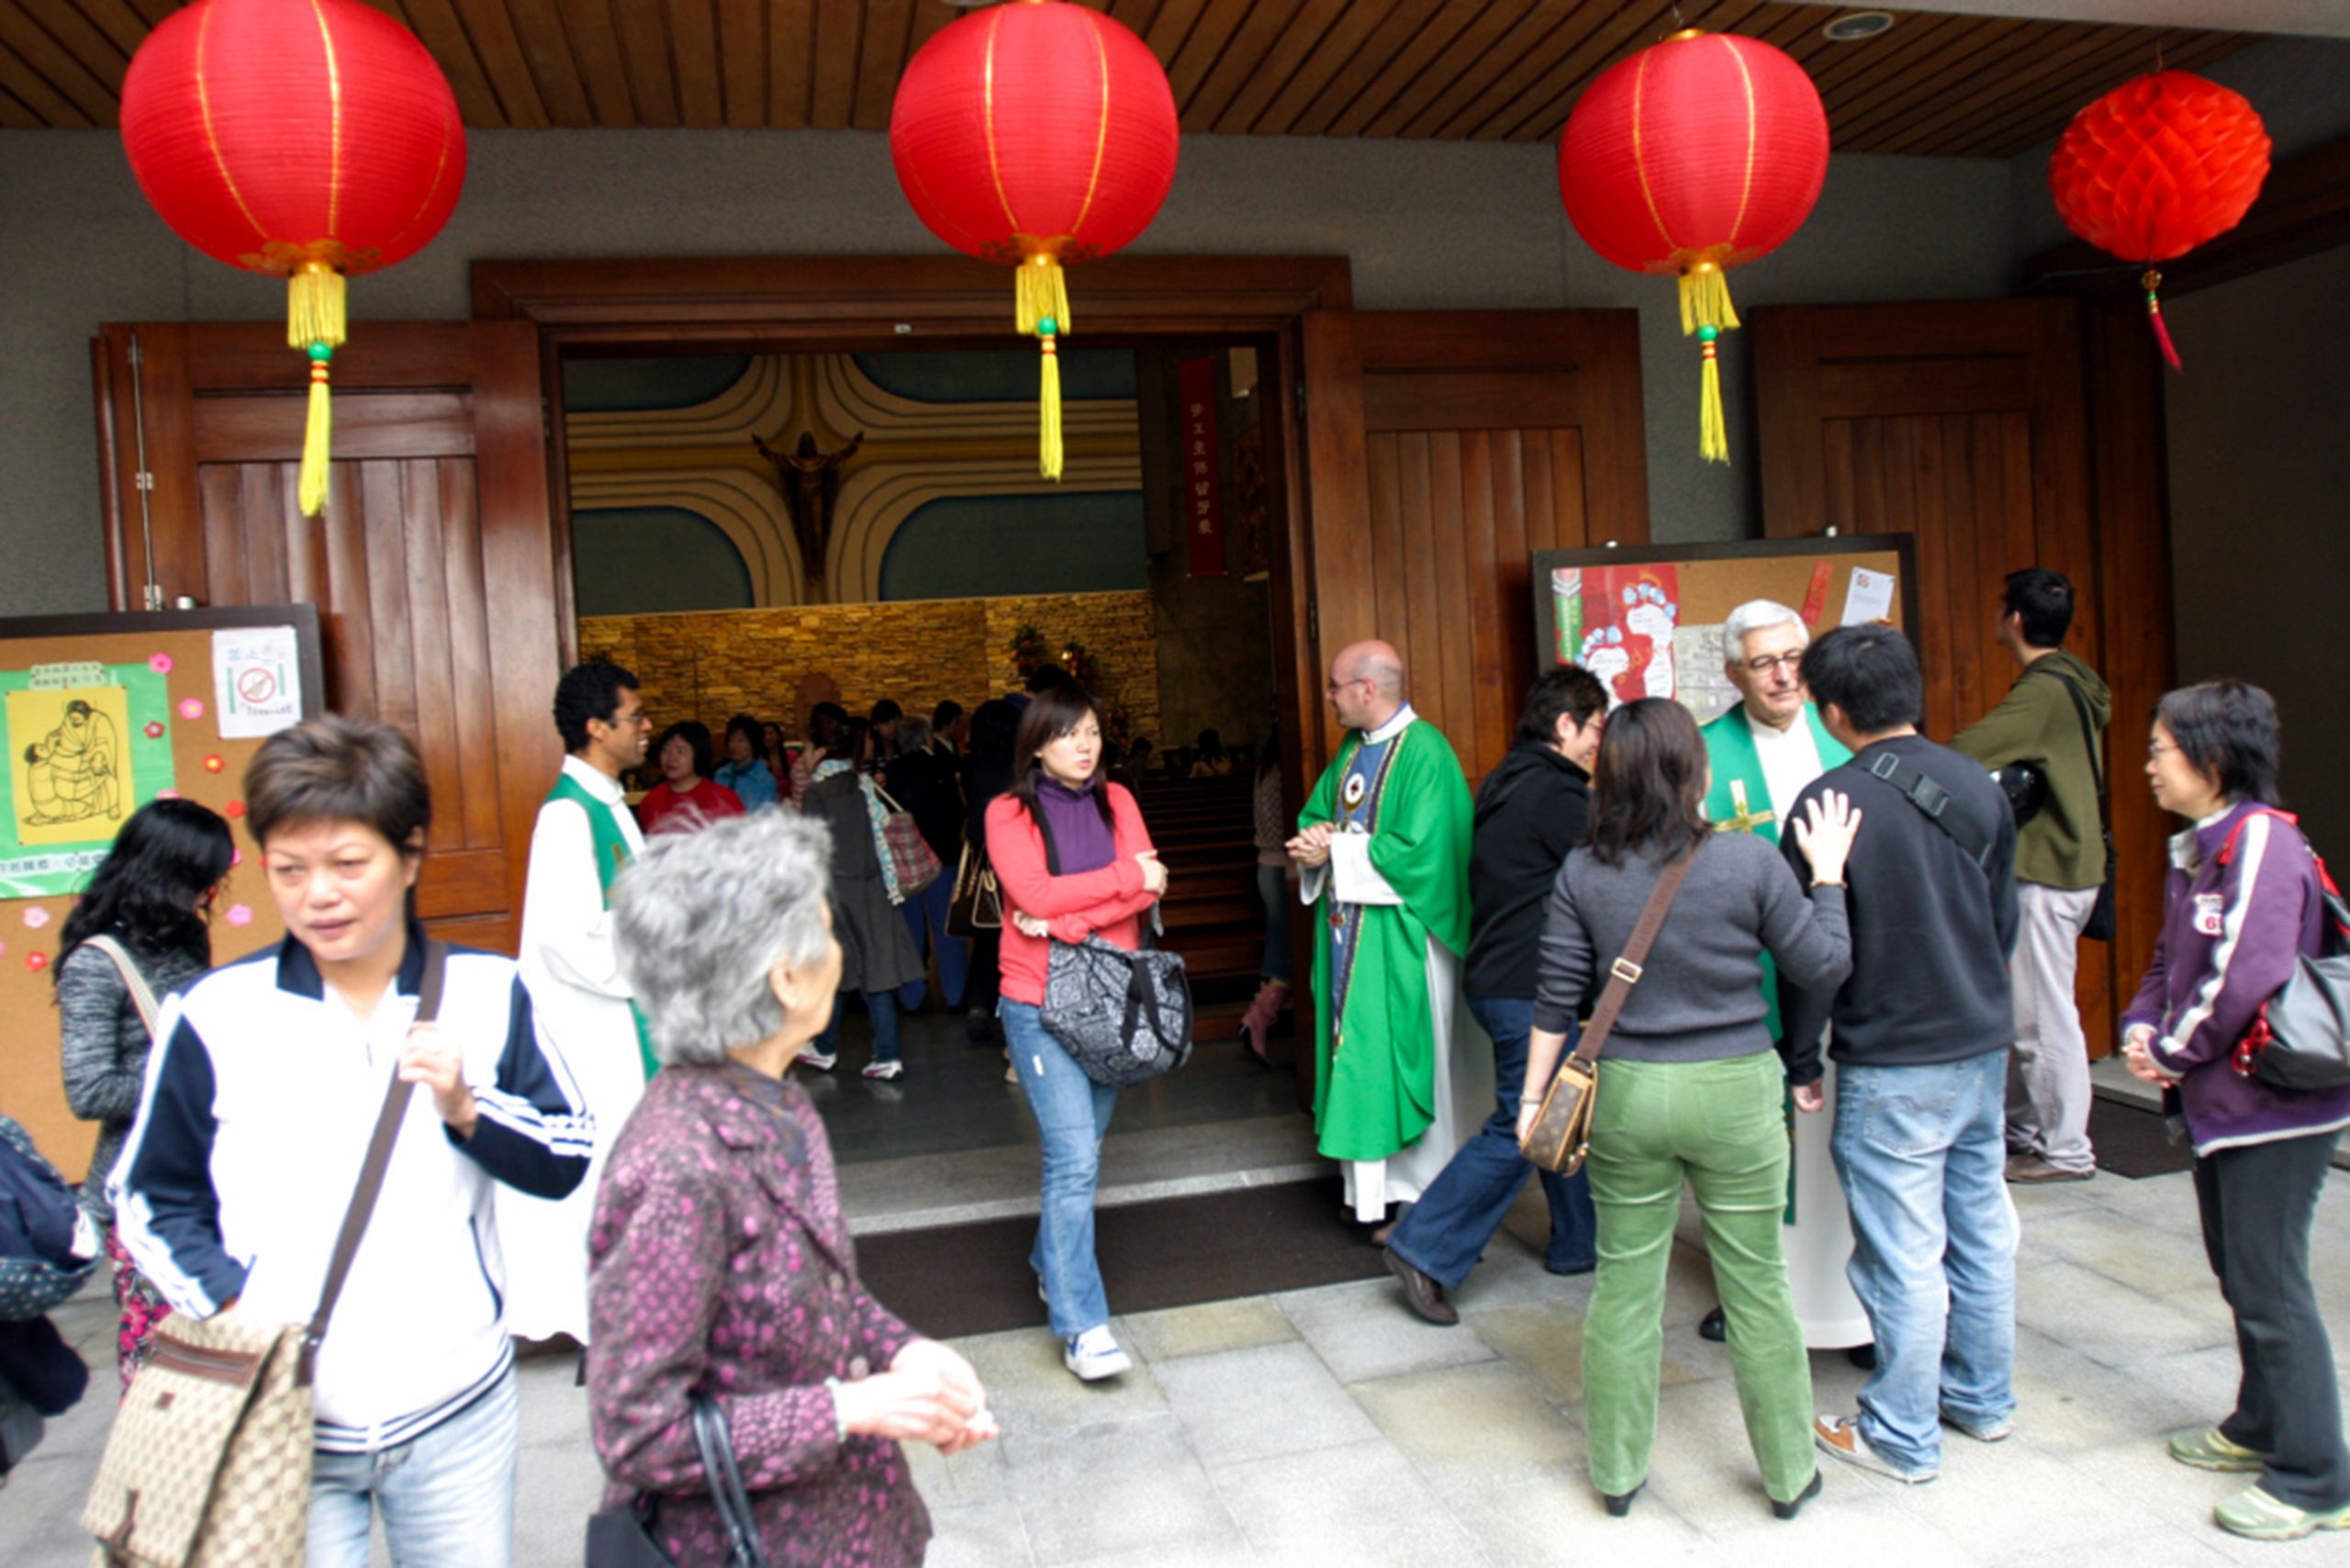 A priests greets visitors to Mass at a church in Macau China